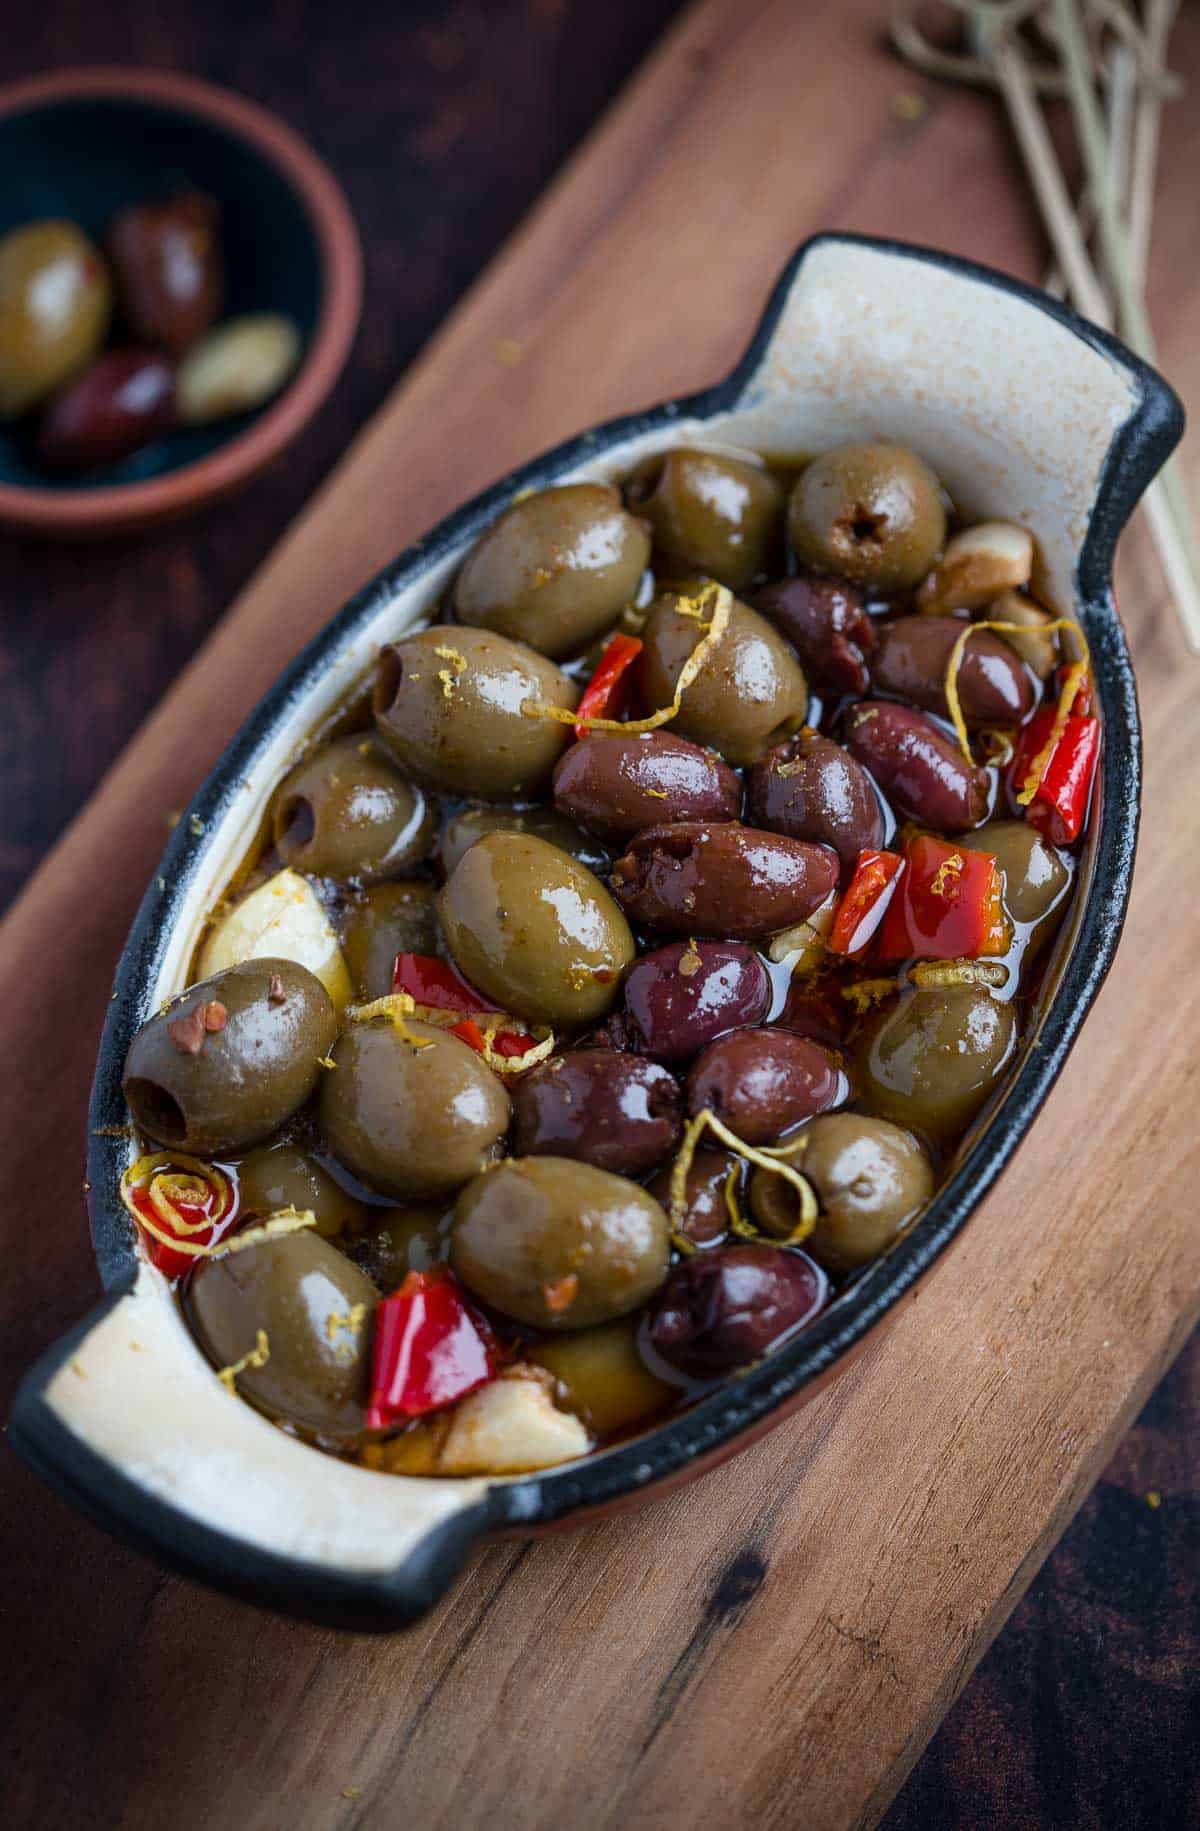 How To Make Olives in Brine - Give Recipe